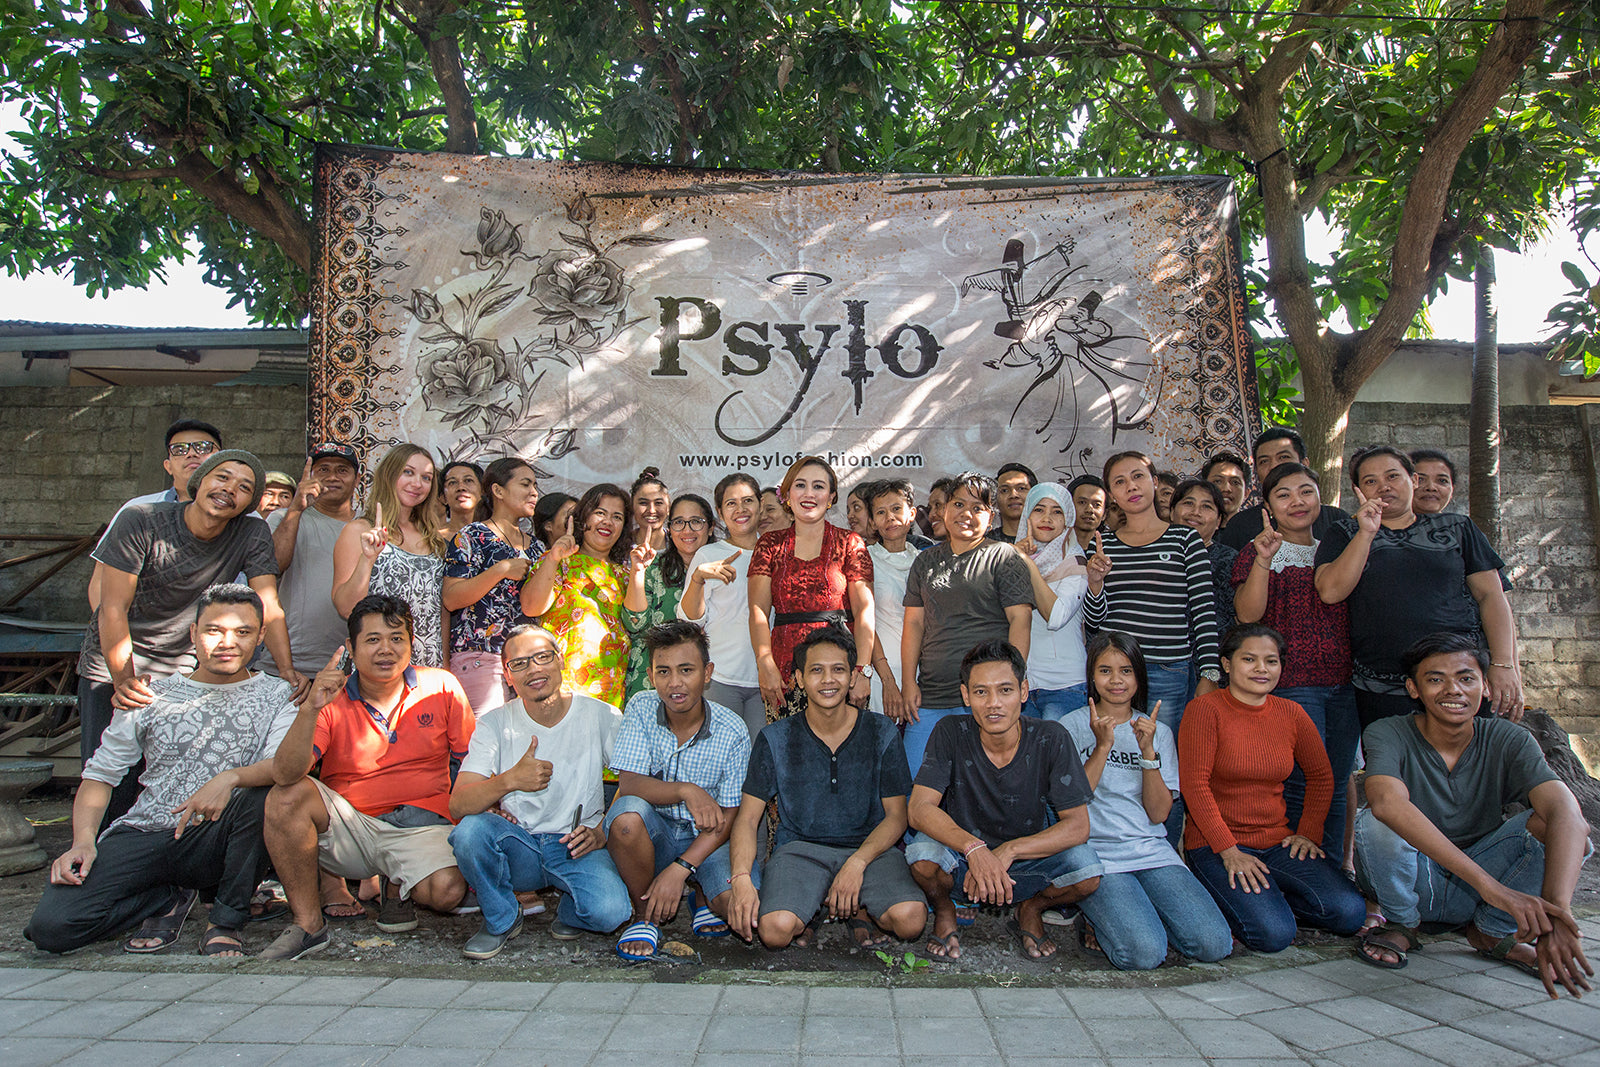 Meet the Psylo Team - Who Makes Your Clothes